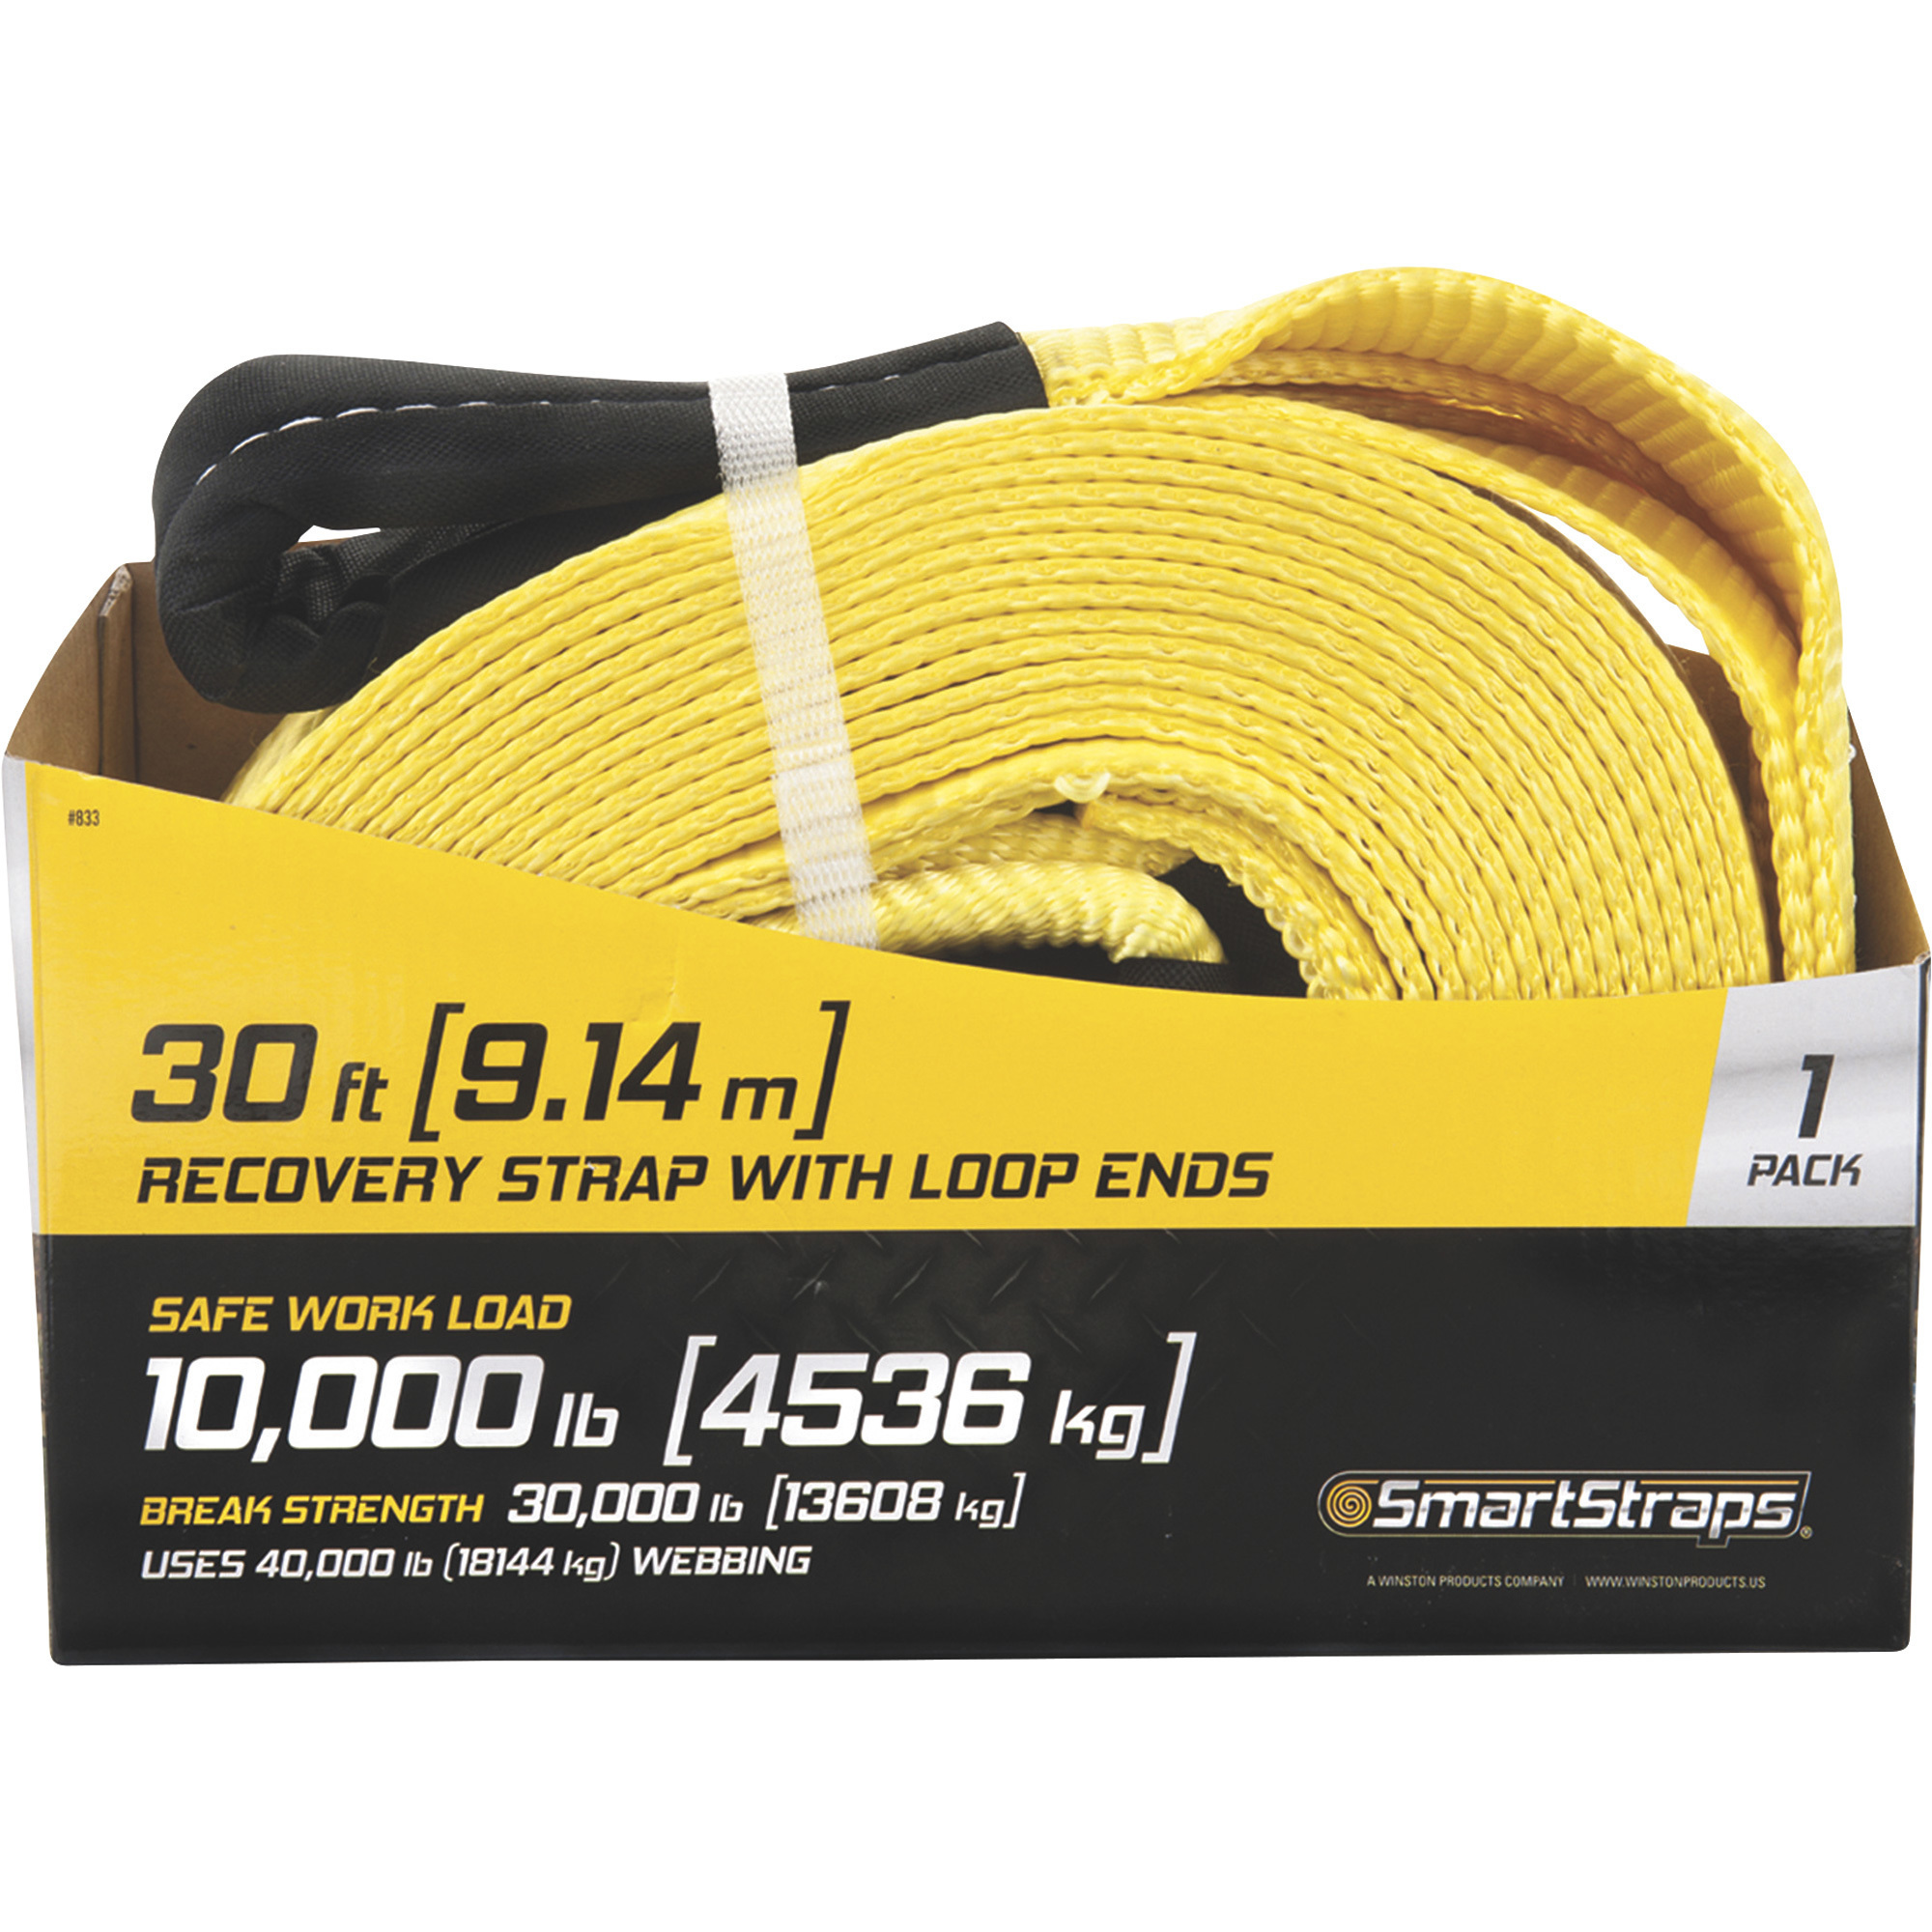 Smart Straps Heavy-Duty Recovery Tow Strap with Loop Ends, 30ft.L x 4in.W,  10,000-Lb. Working Load, 30,000-Lb. Breaking Strength, Yellow, Model# 833